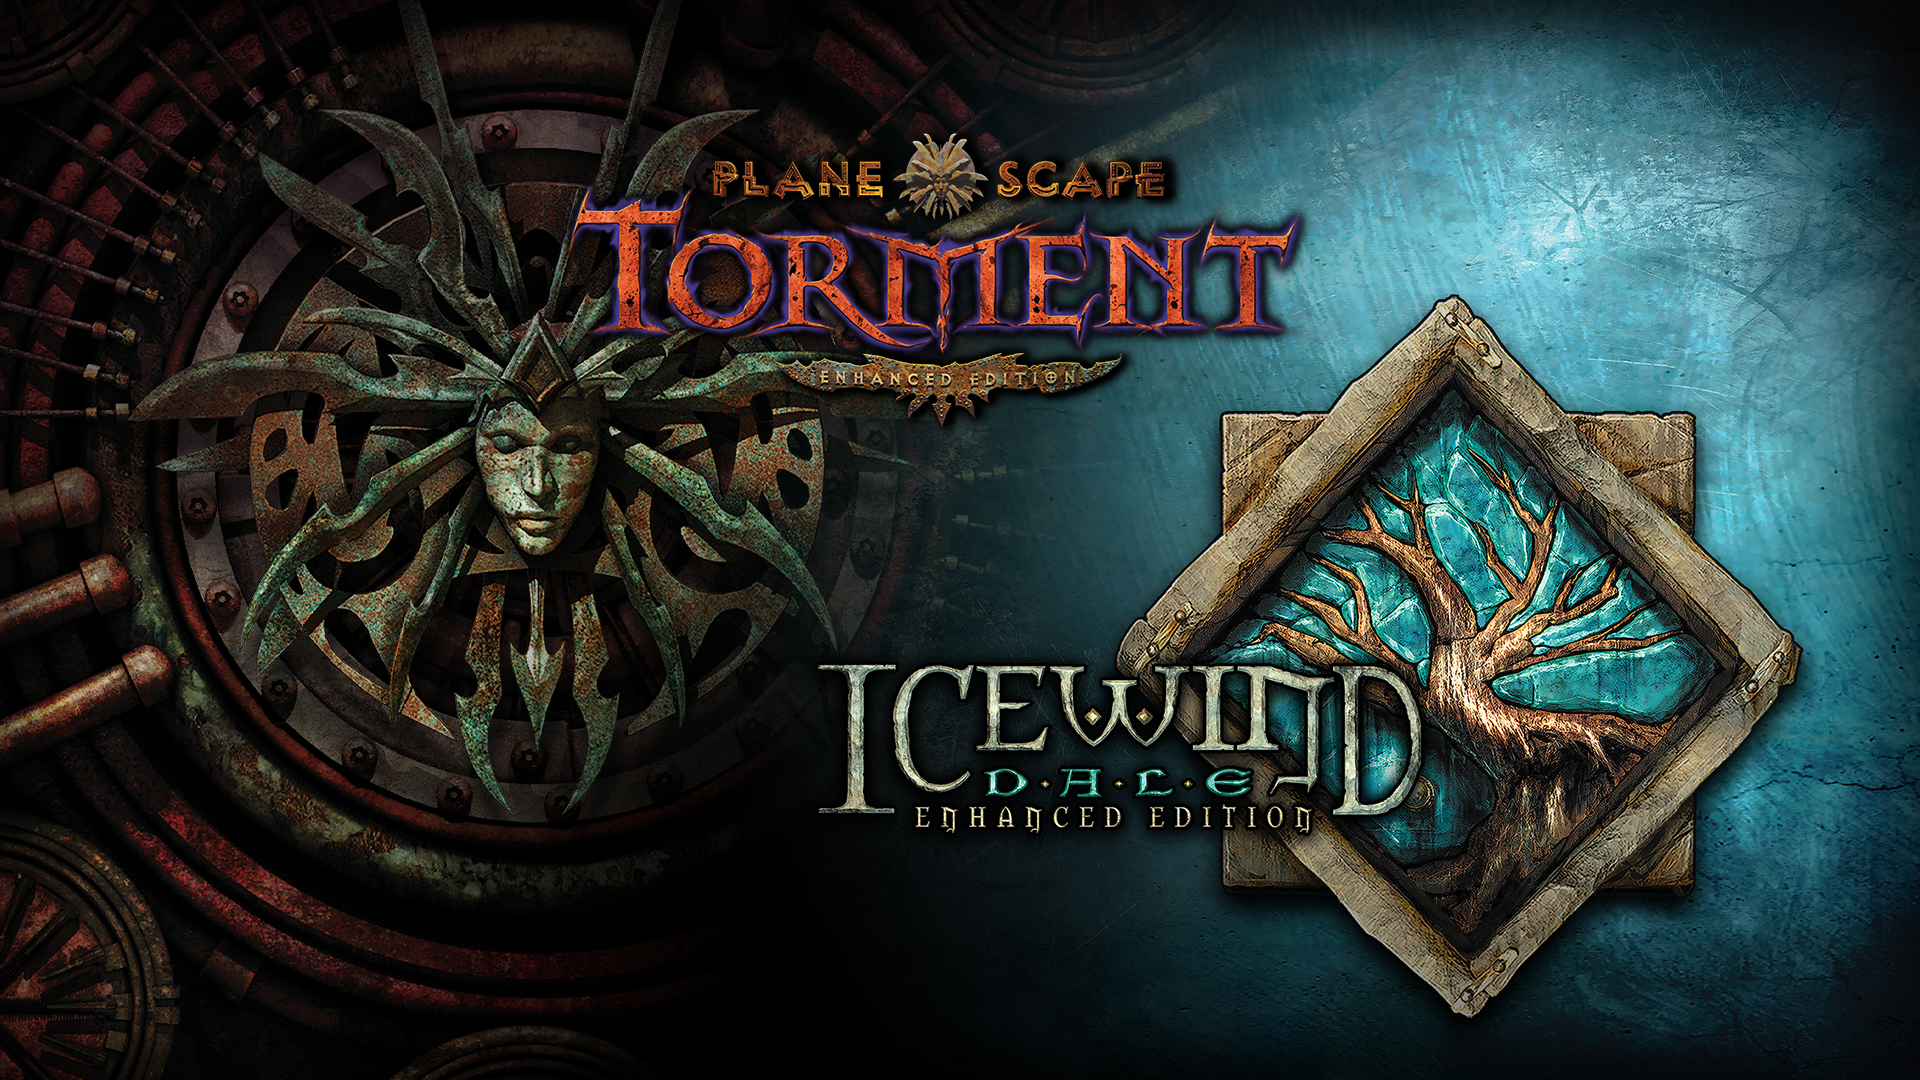 Planescape: Torment and Icewind Dale: Enhanced Editions for Nintendo Switch Game Details